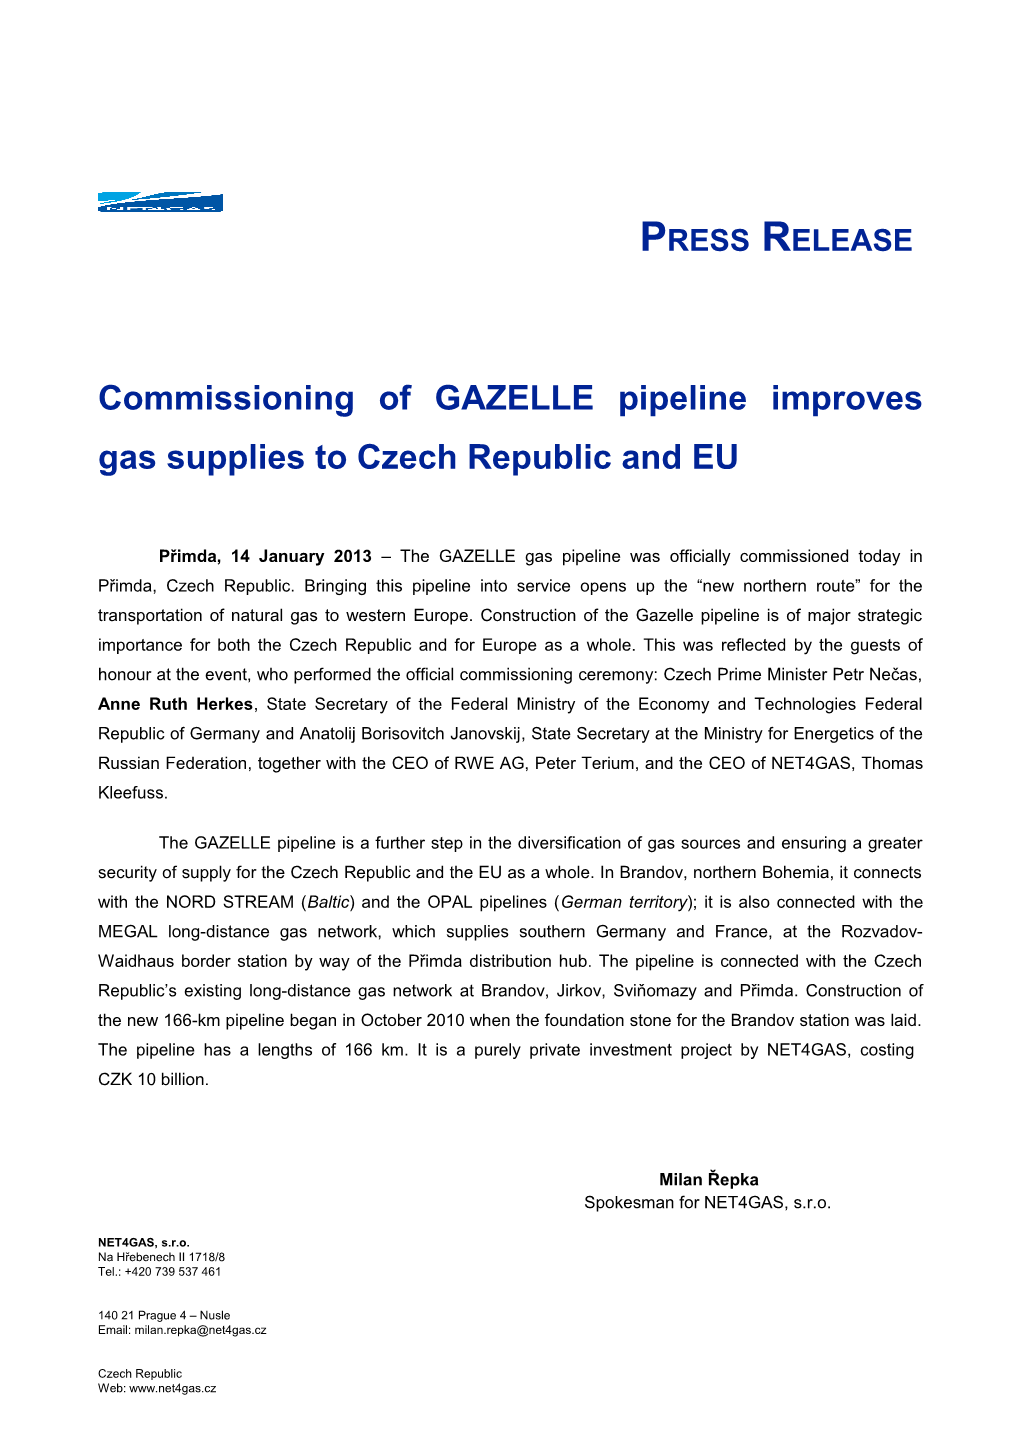 Commissioning of GAZELLE Pipeline Improves Gas Supplies to Czech Republic and EU